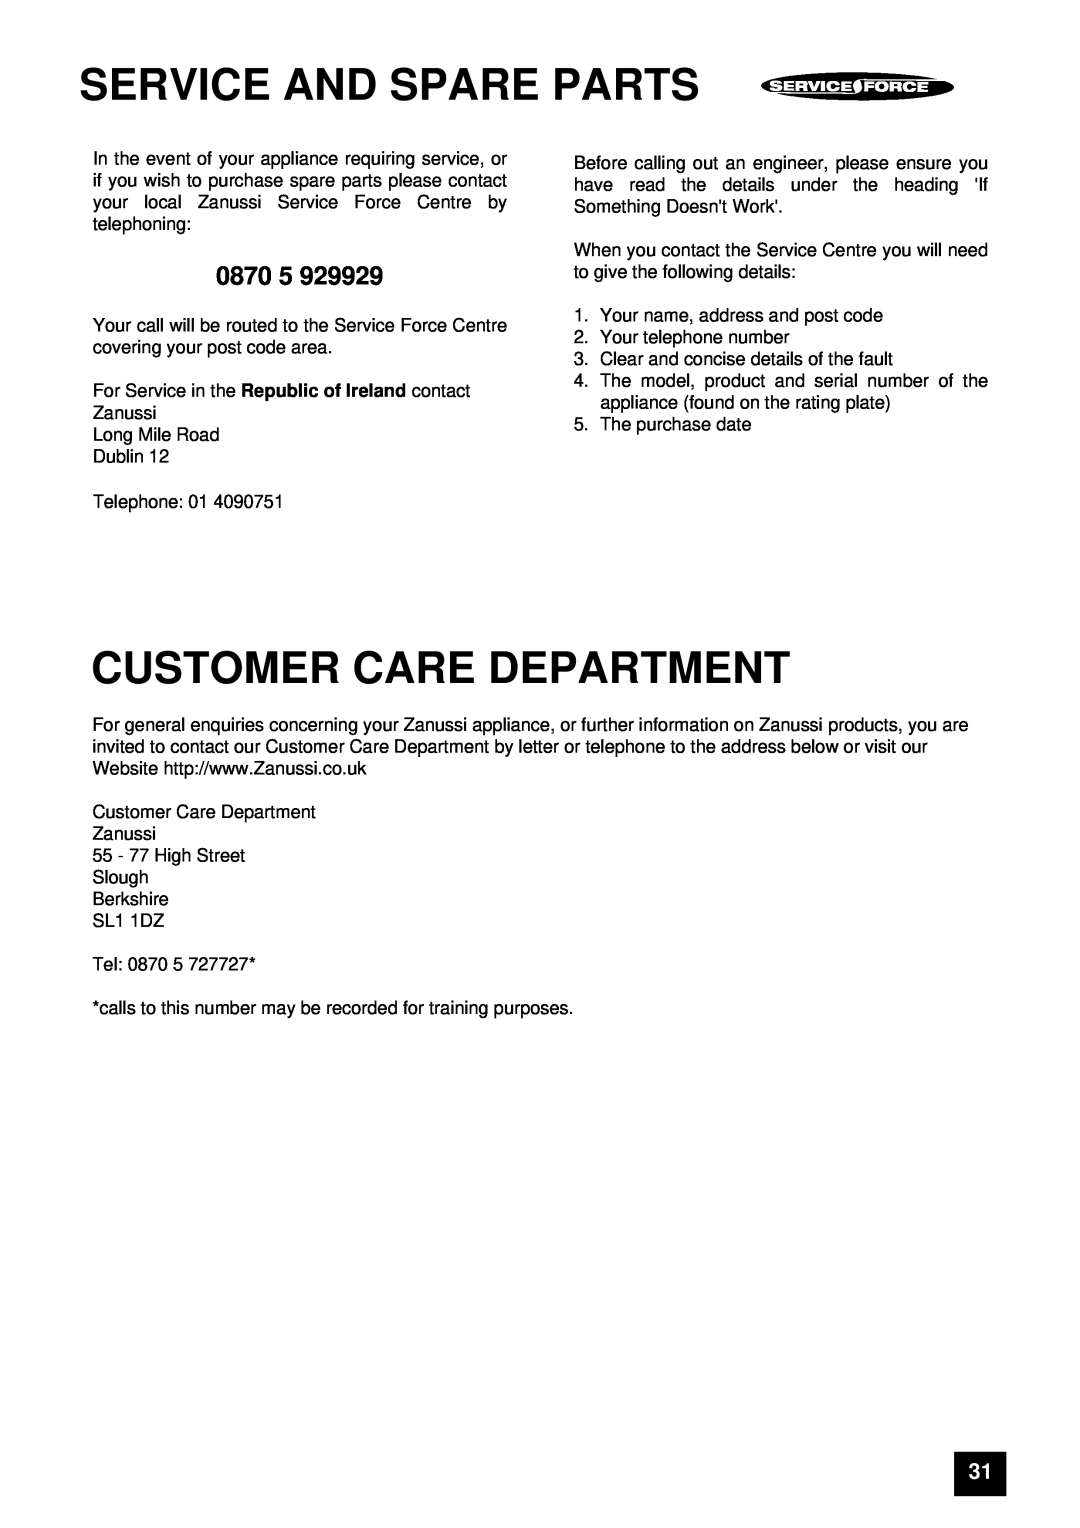 Zanussi ZCE ID manual 0870, Service And Spare Parts, Customer Care Department 